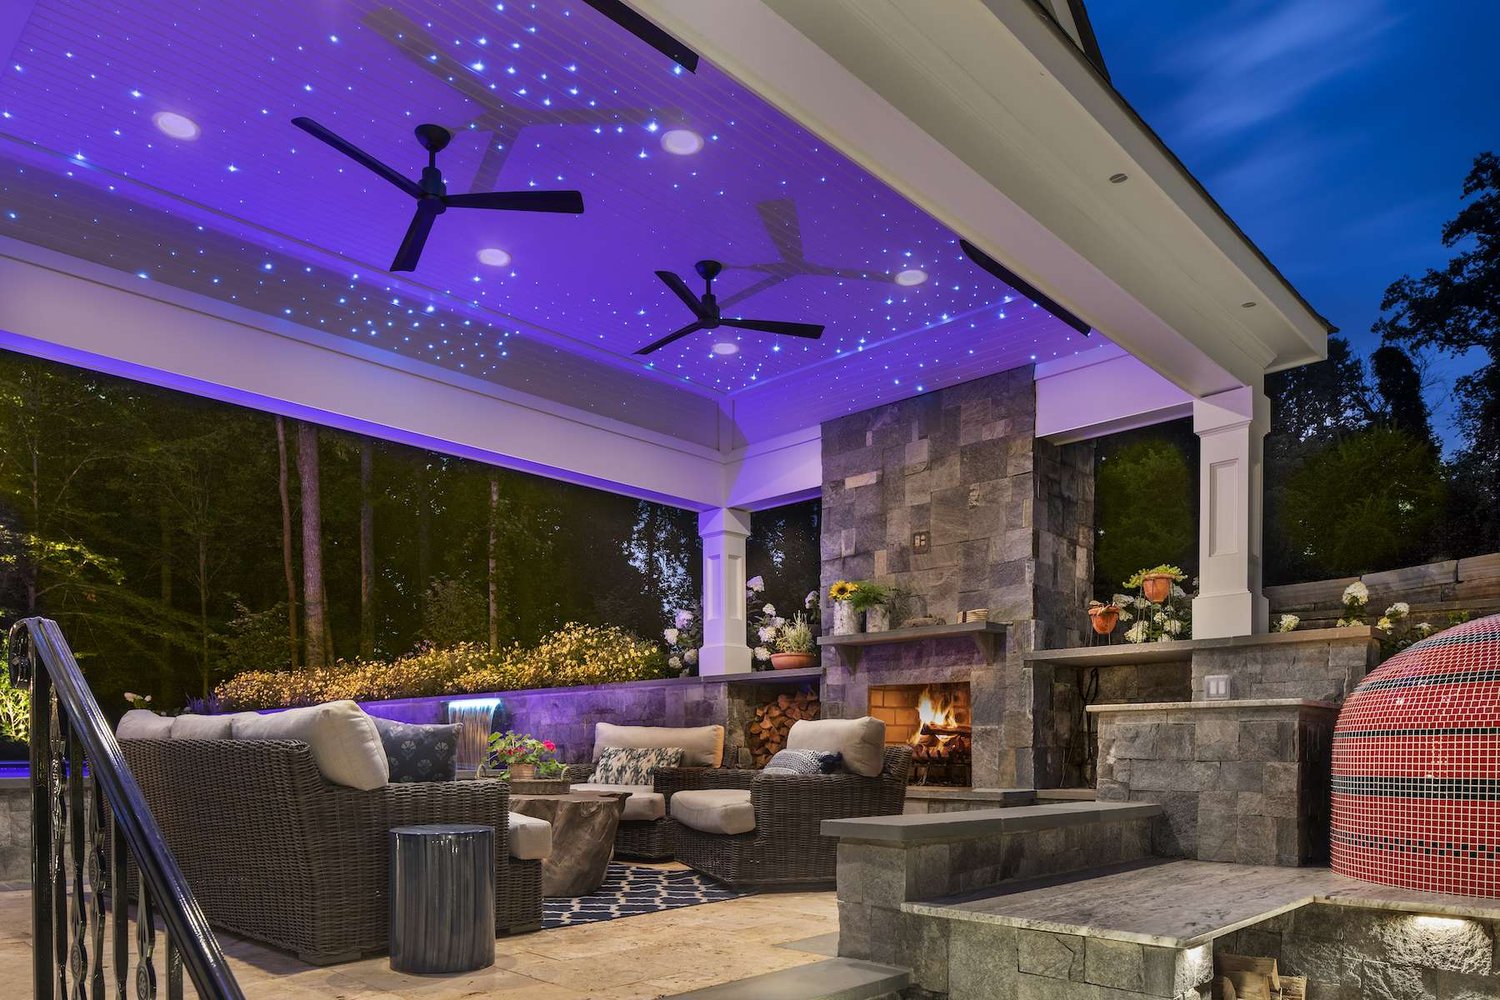 Backyard entertainment area, seating, and fireplace